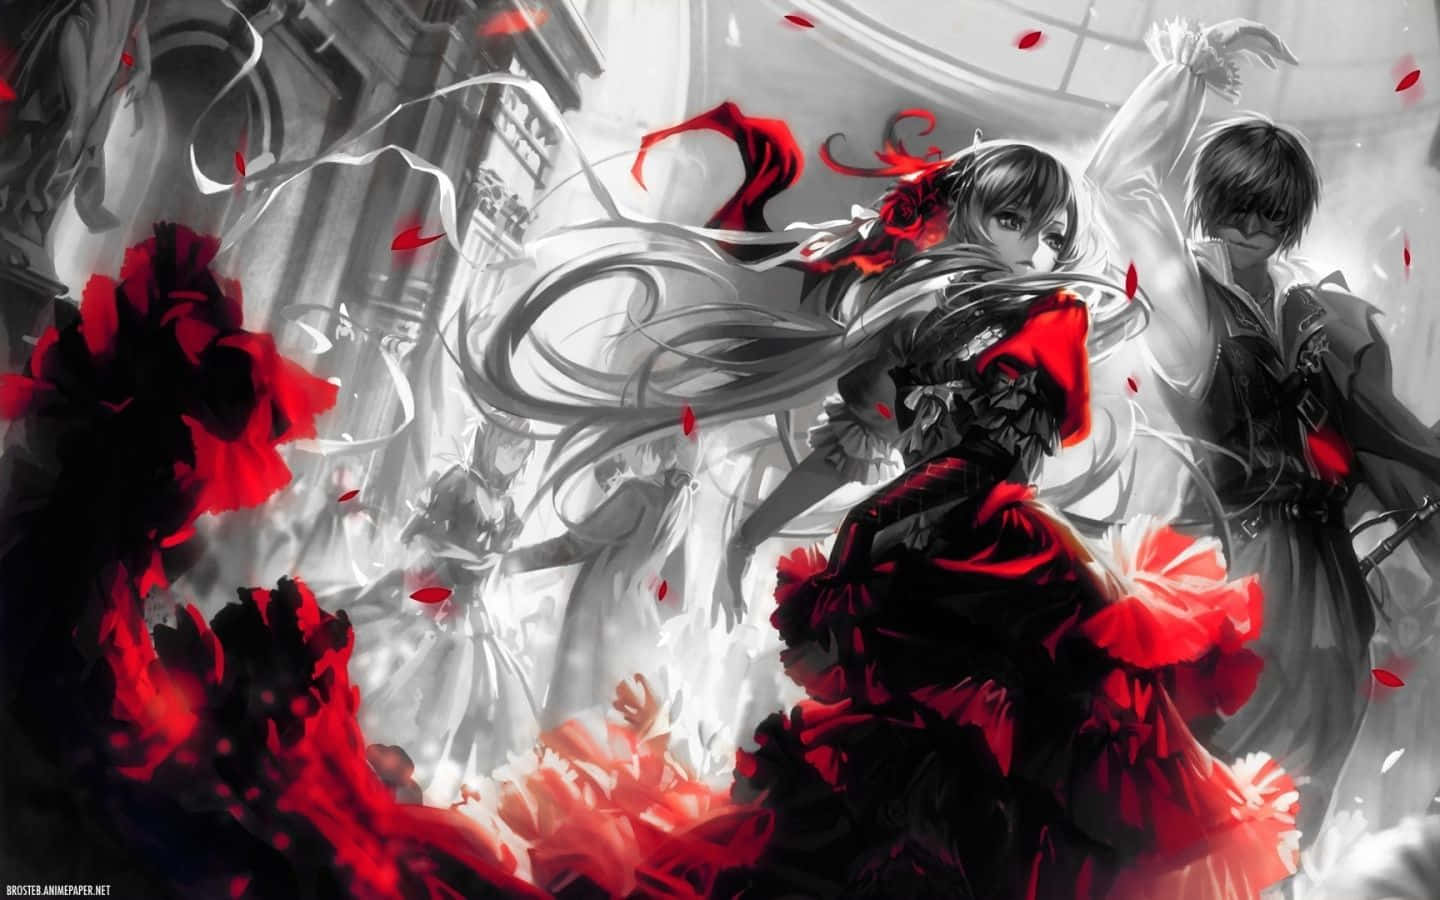 Intriguing Red and Black Anime Art Wallpaper